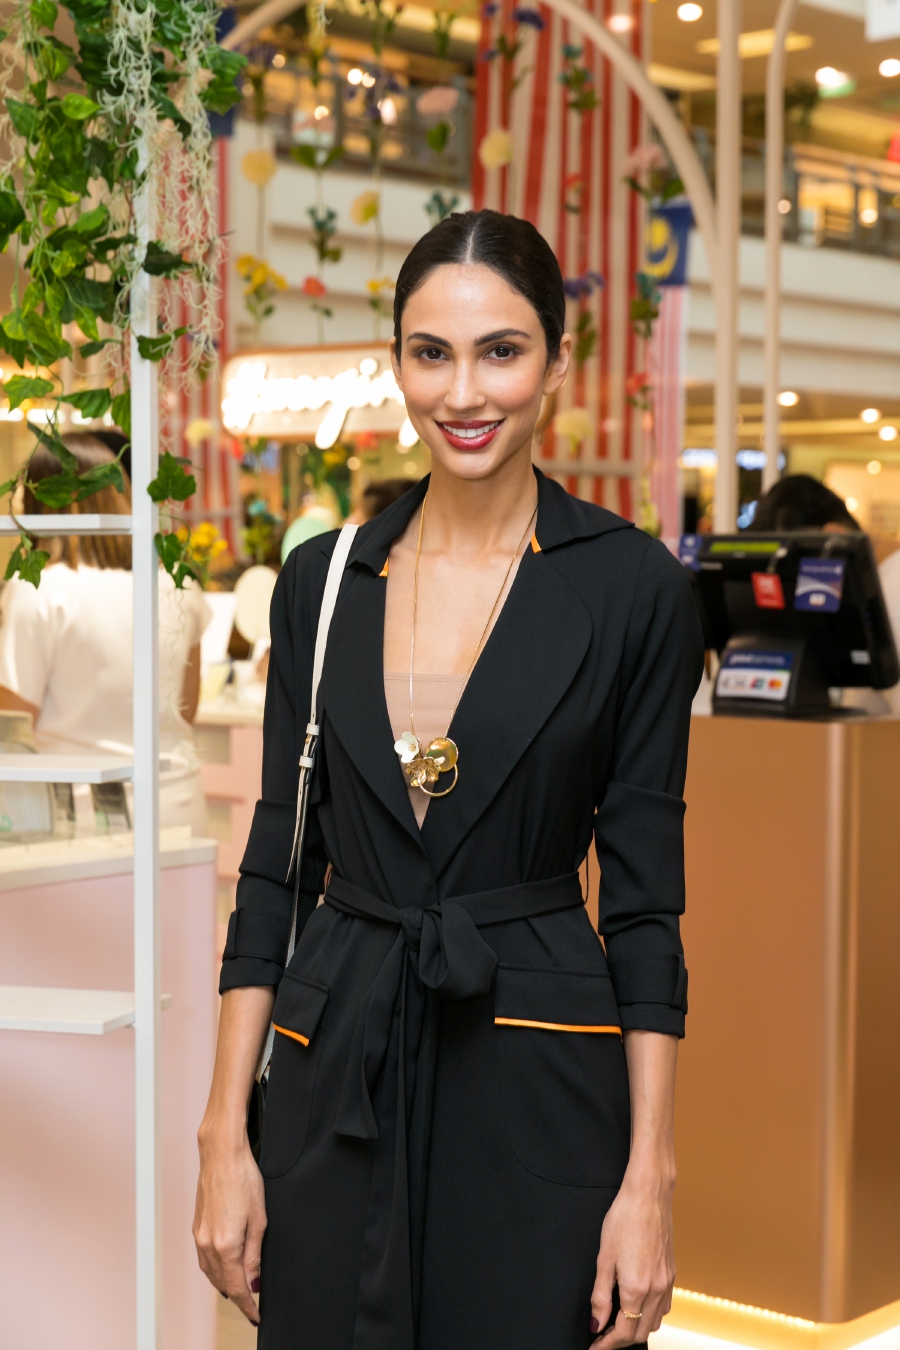 Model and activist Deborah Henry at the pop-up store wearing a necklace from the Eden collection.